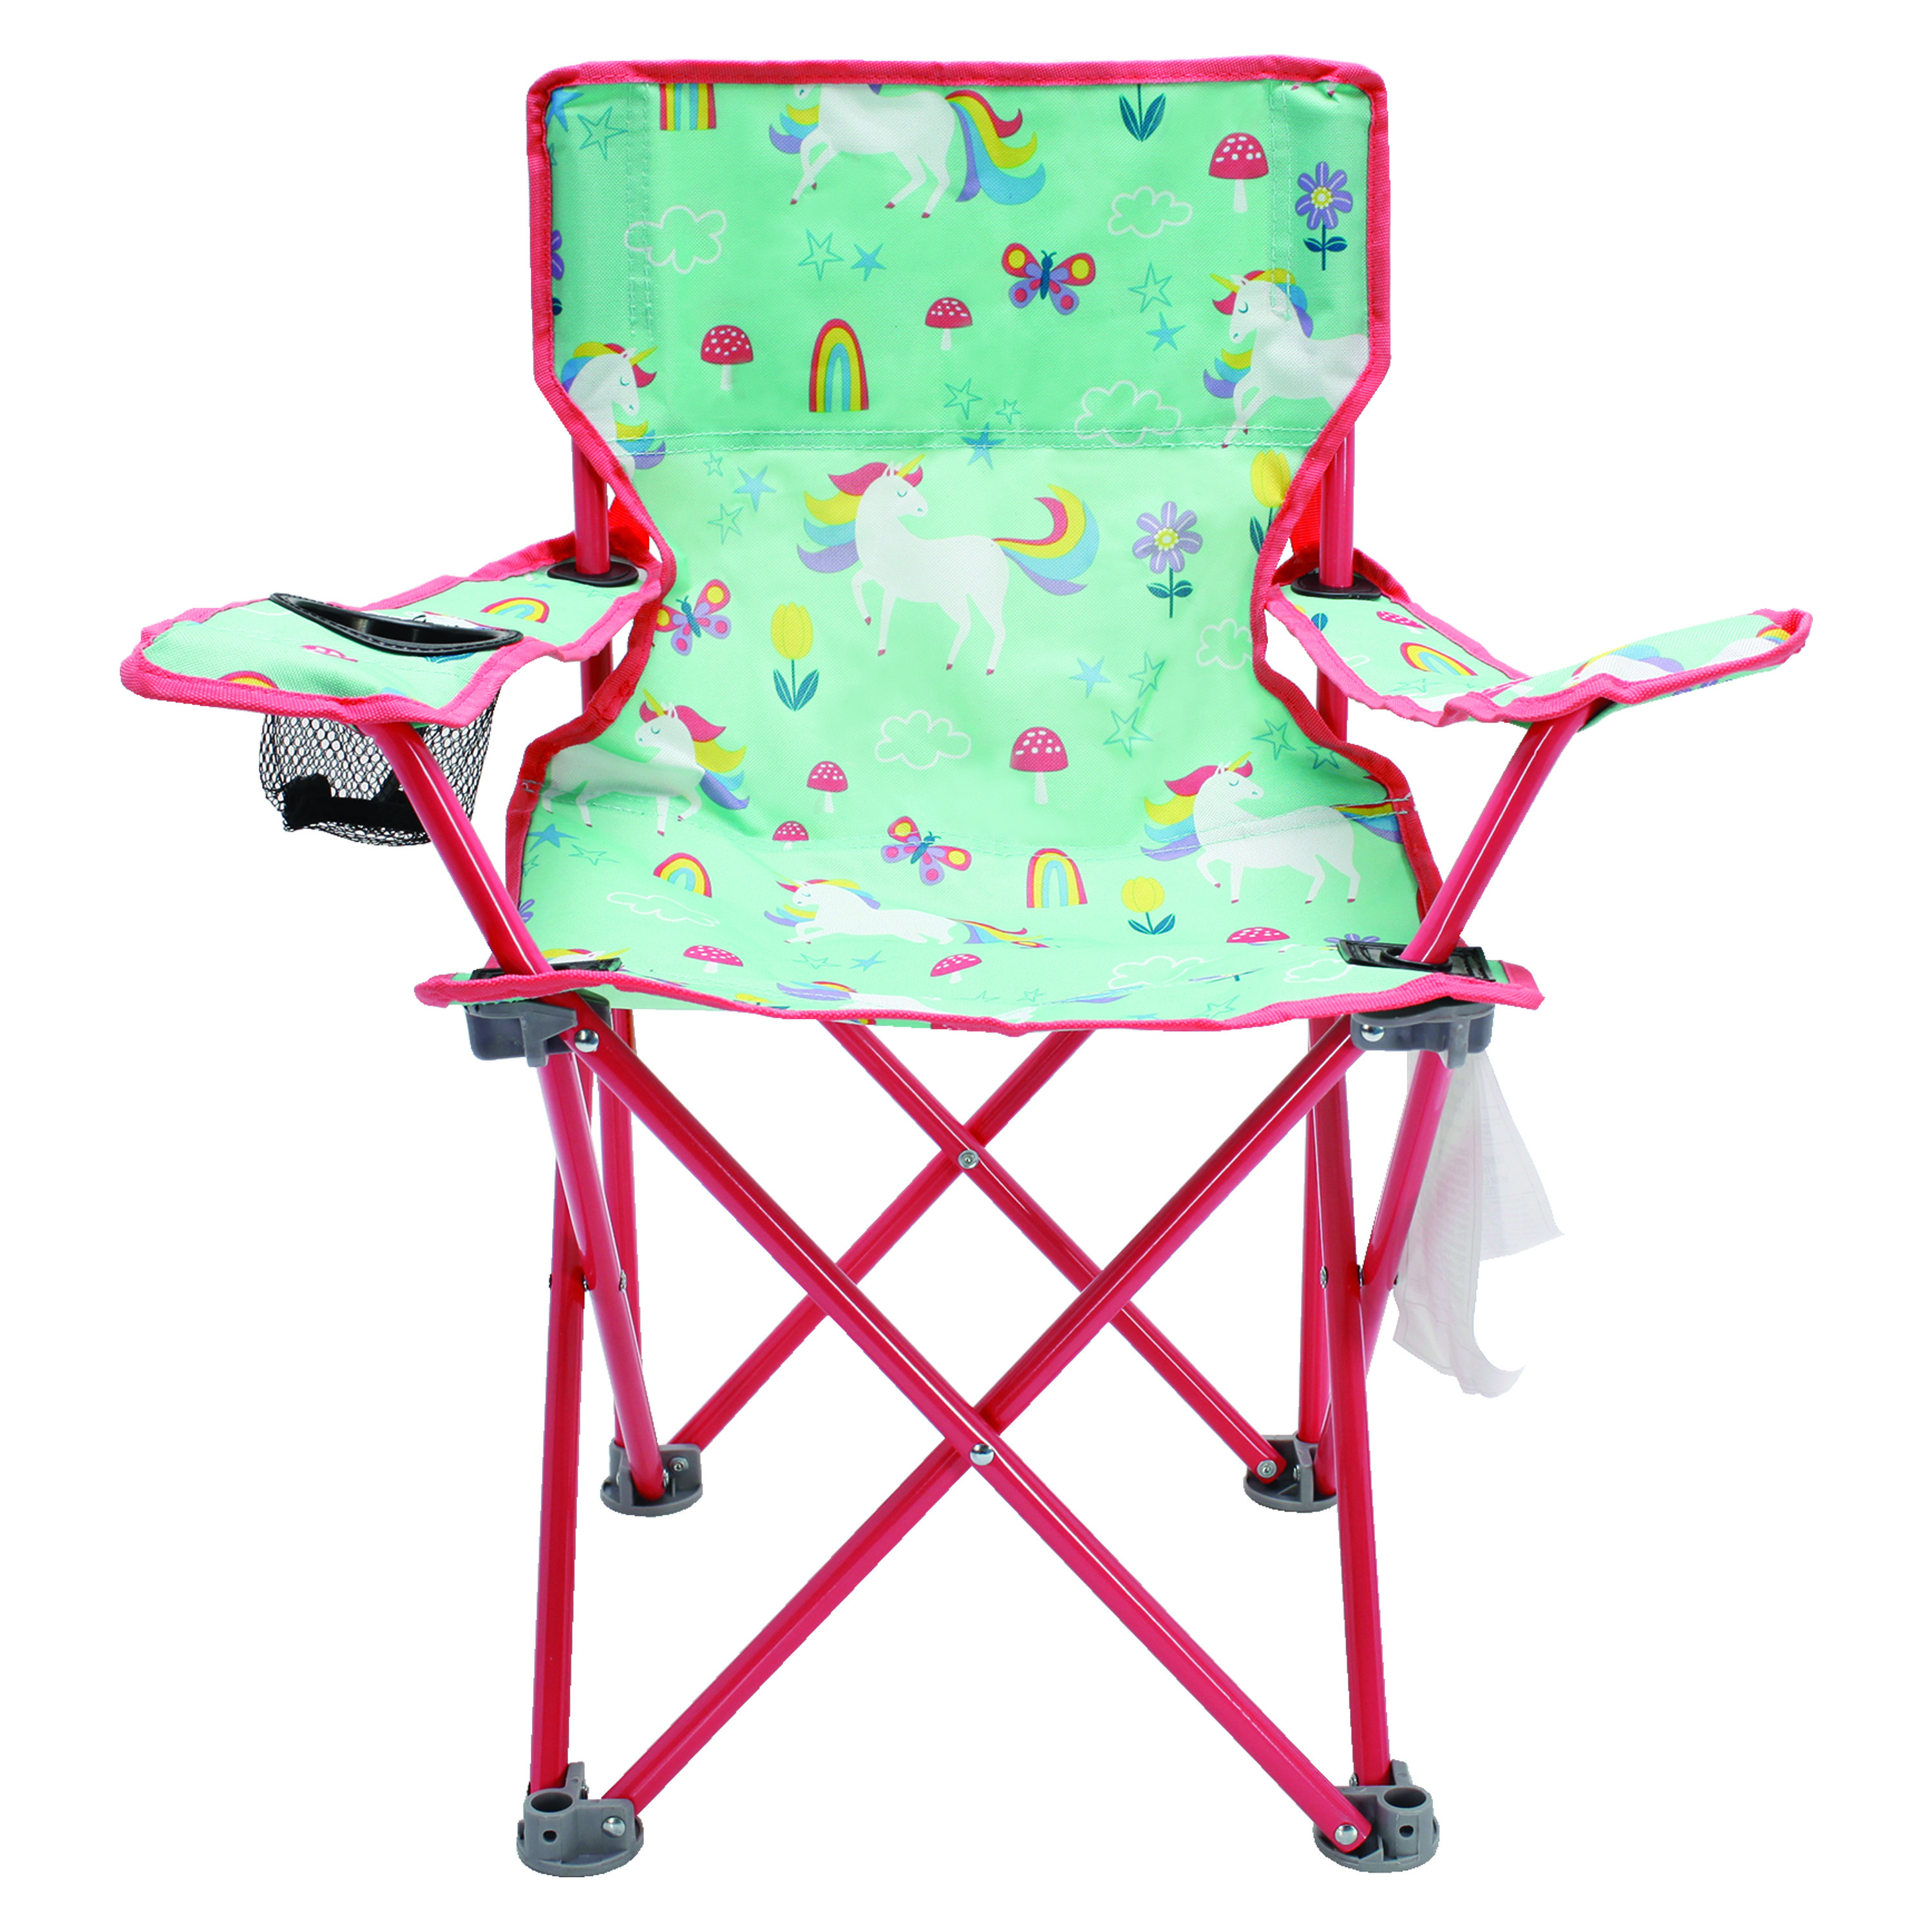 Crckt Kids Folding Camp Chair with Safety Lock (125lb Capacity) Unicorn Print - image 2 of 6